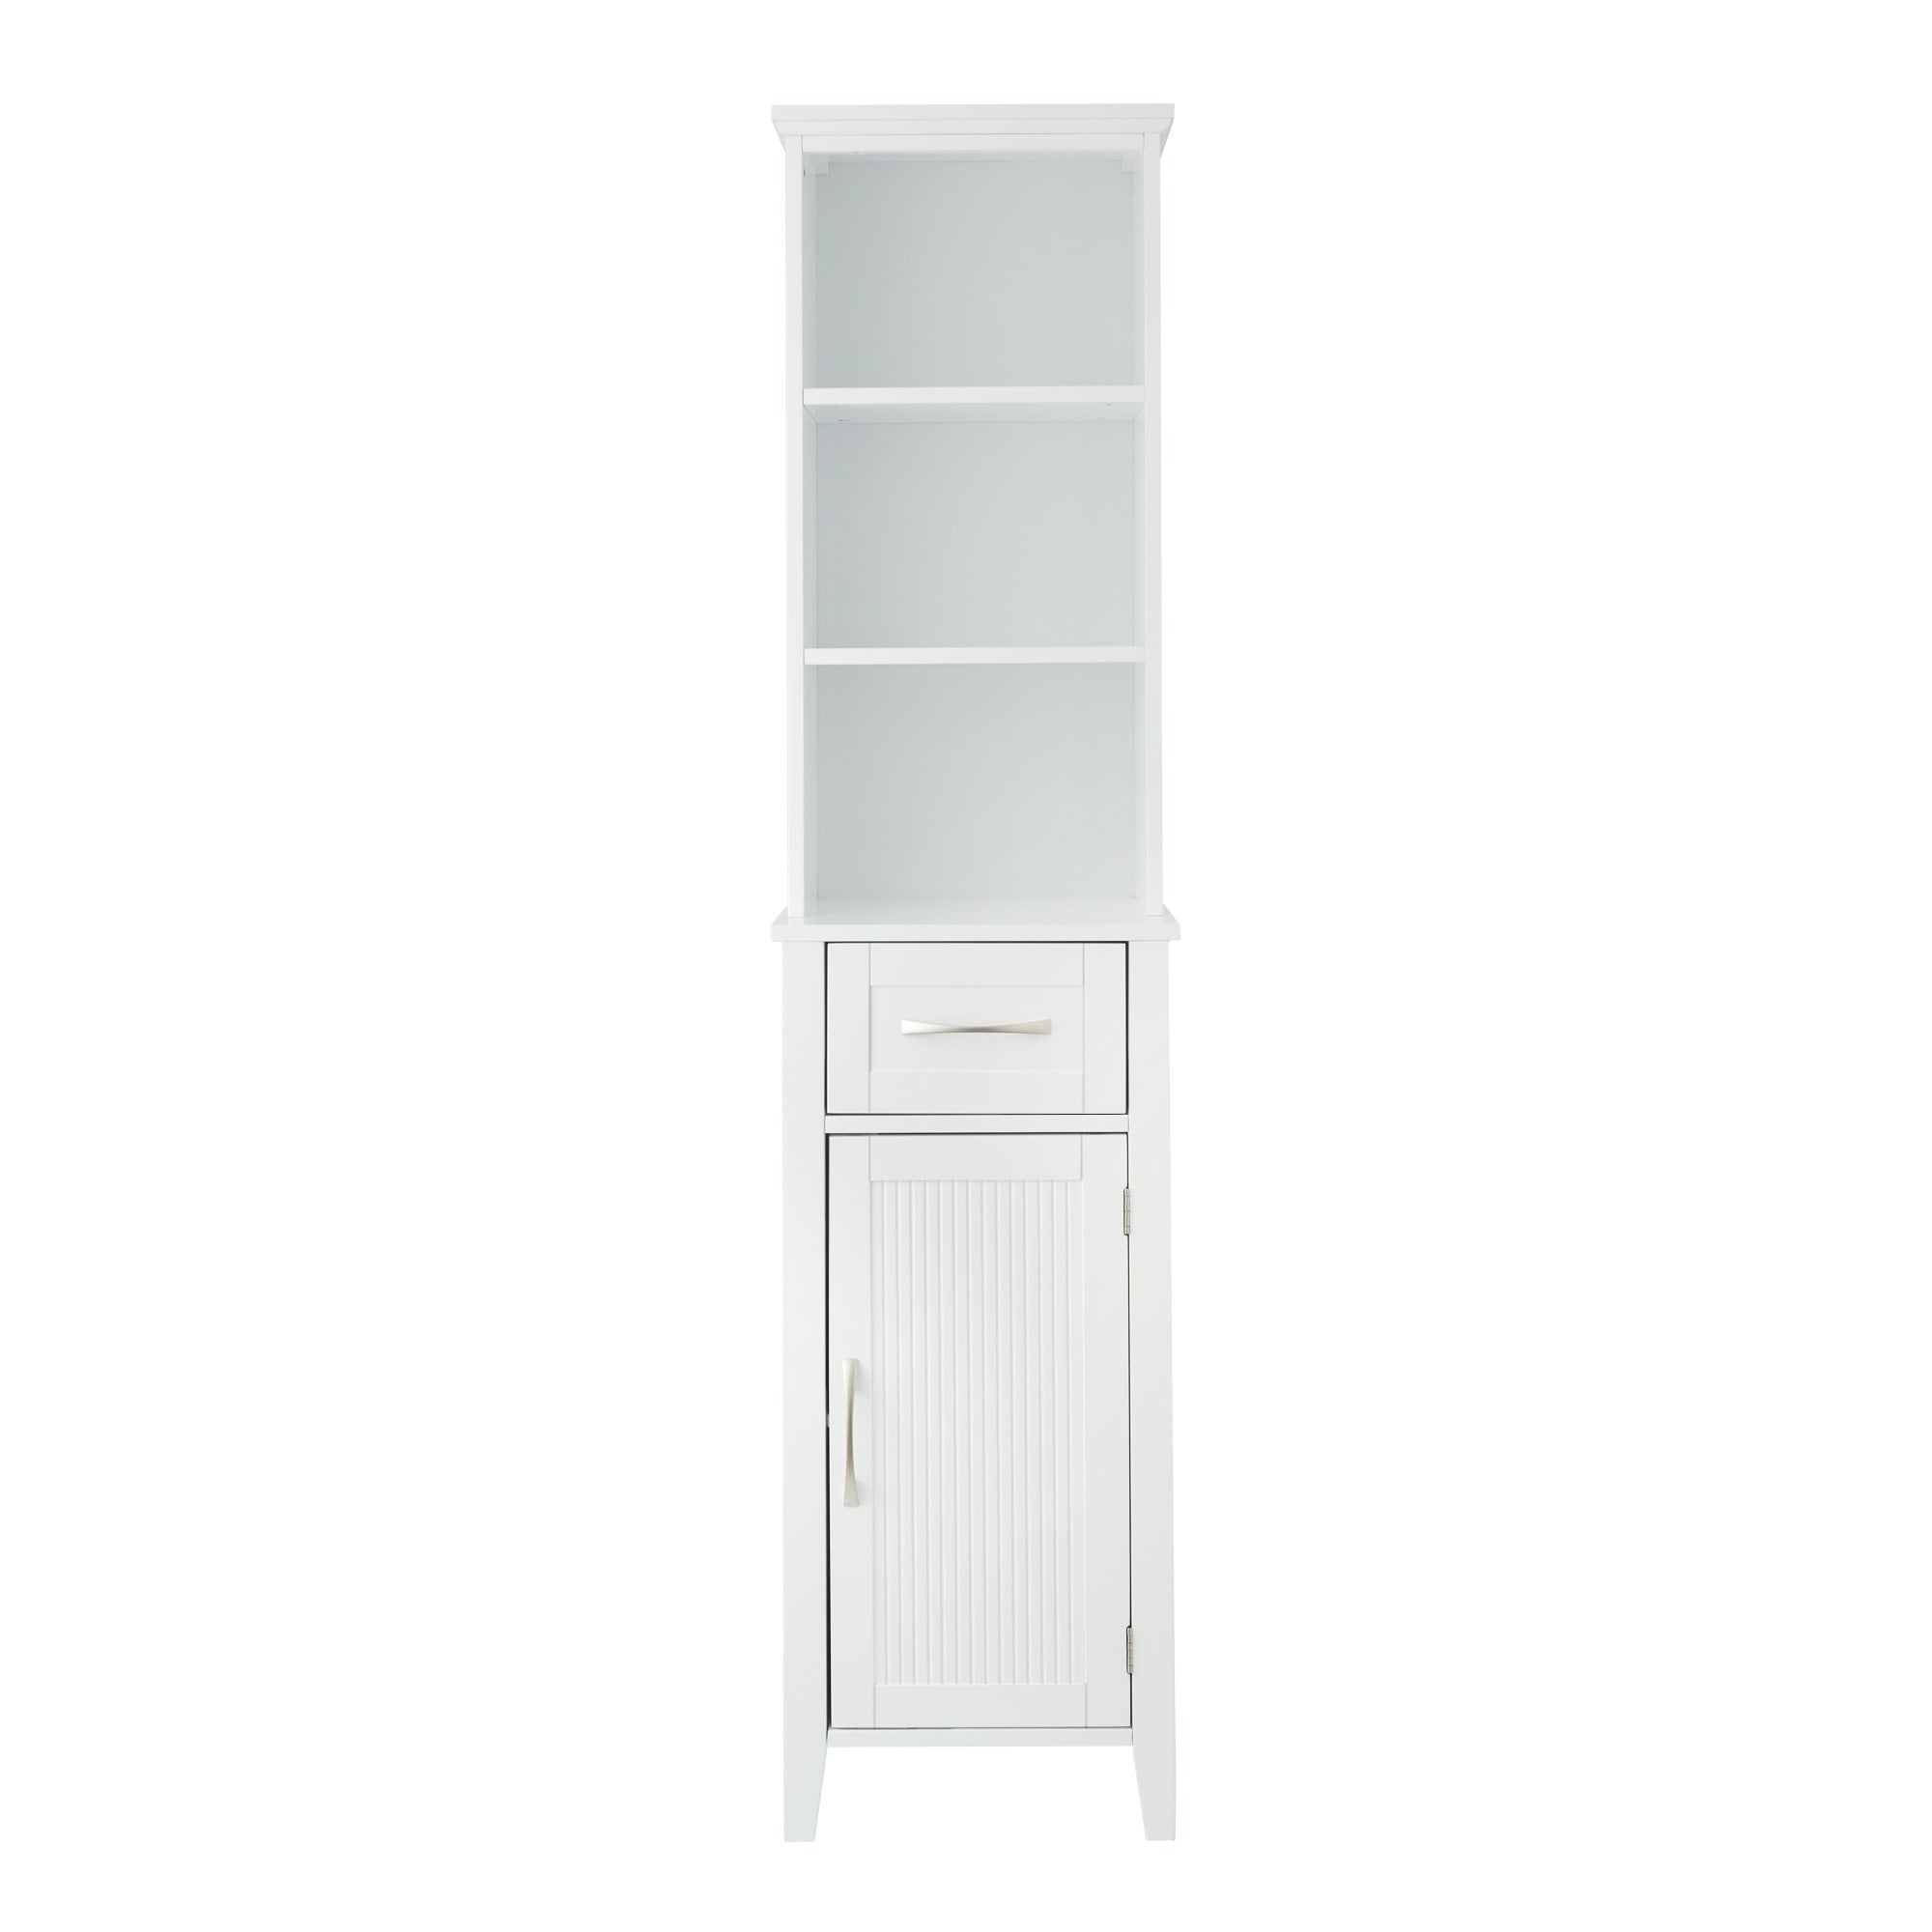 Teamson Home Newport Contemporary Wooden Linen Tower Storage Cabinet with Open Shelves, White